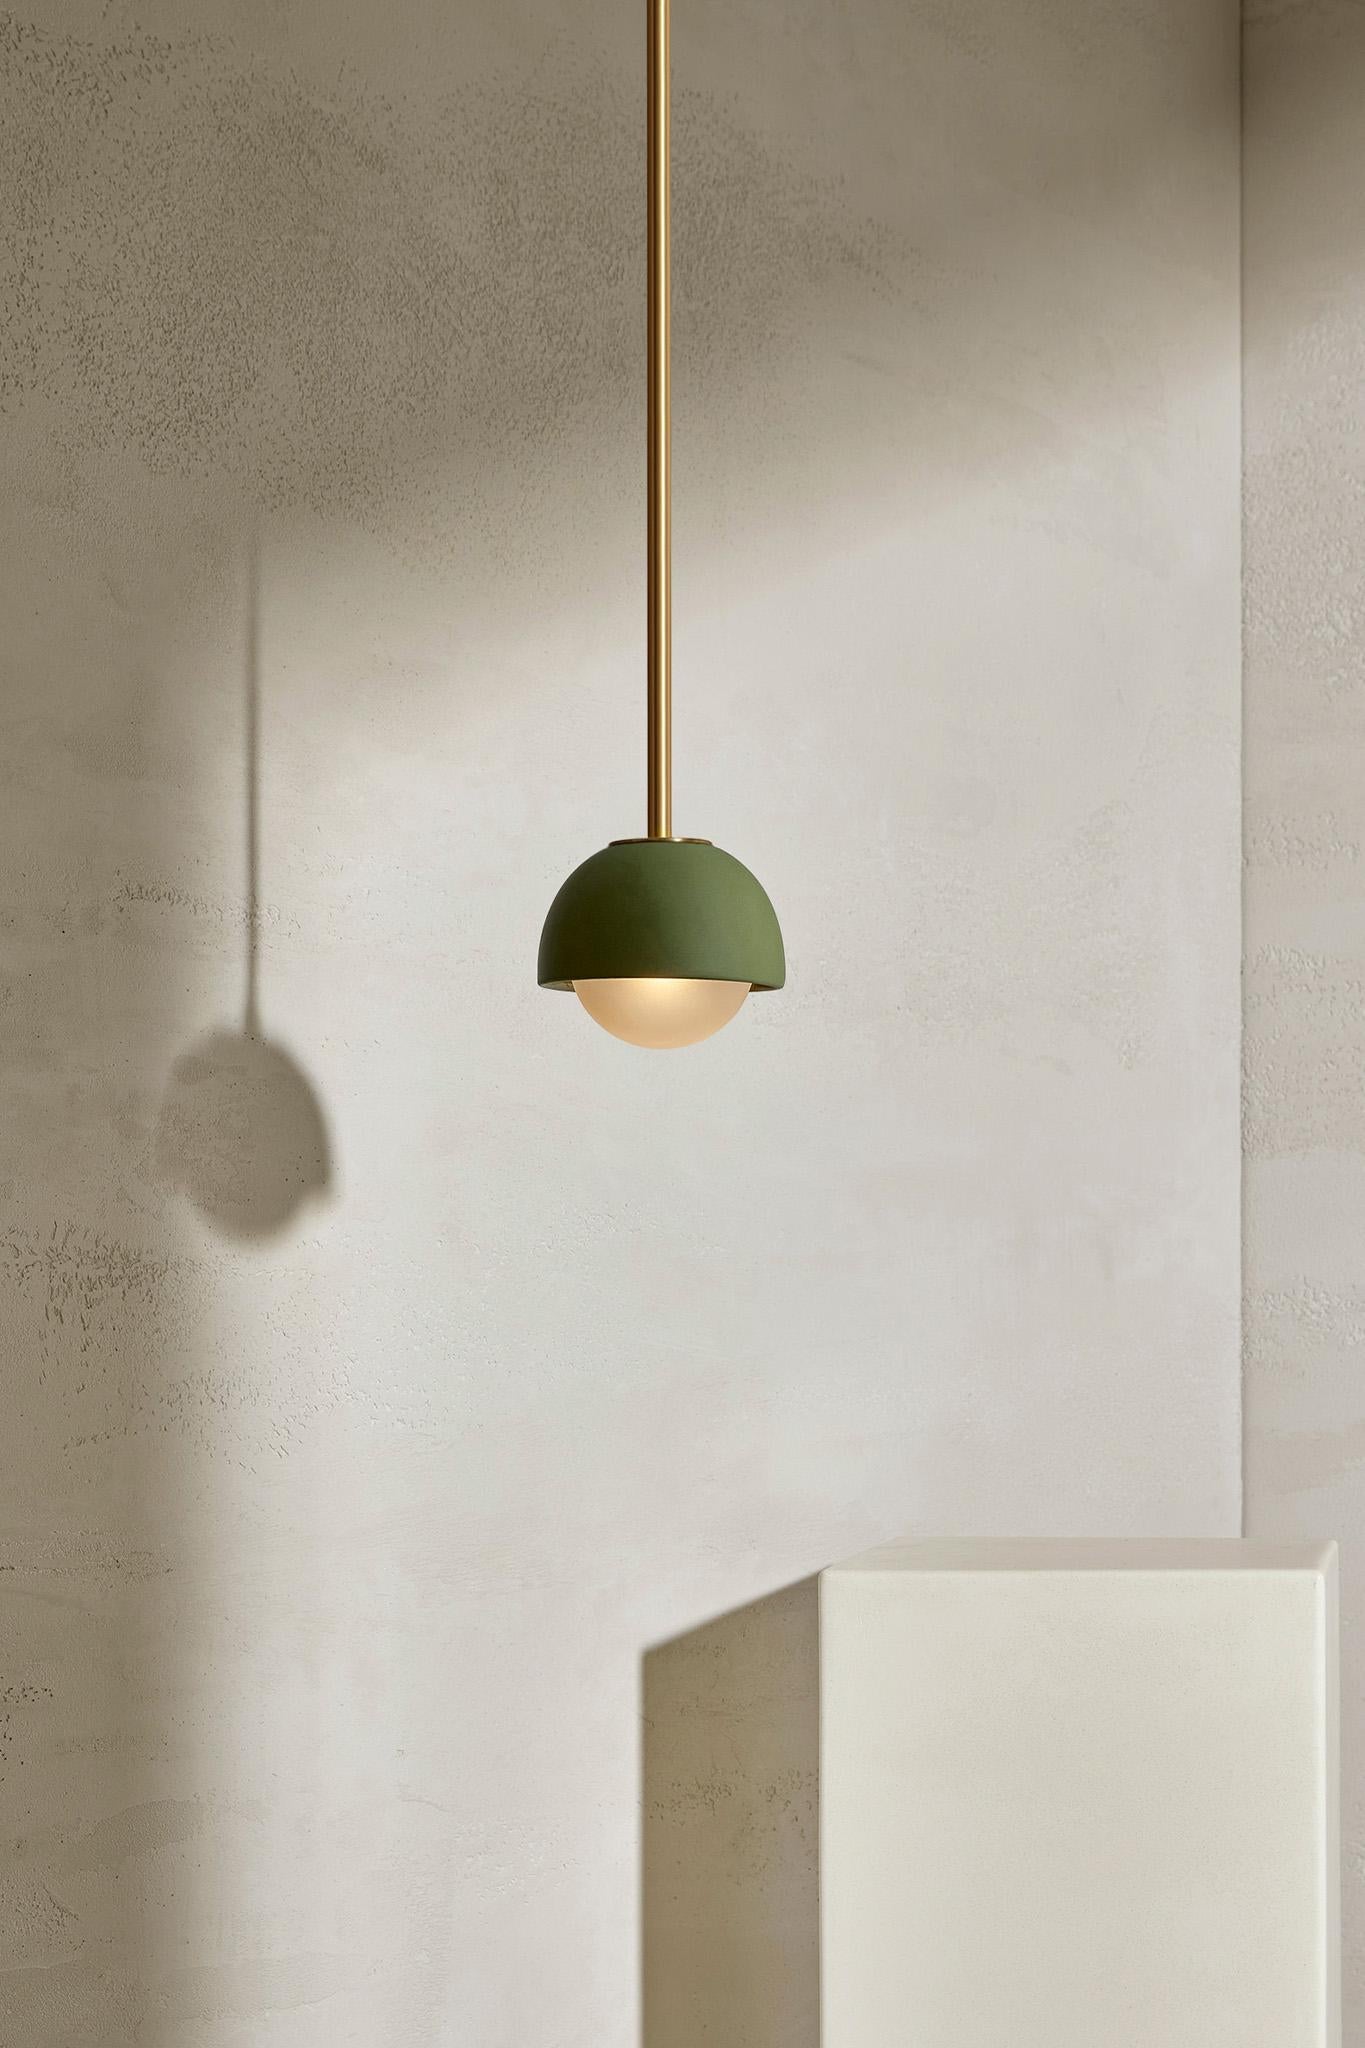 Simple cylindrical ceramic forms define the TERRA 0 range, which comes in pendant light, and long and short articulating wall light formats. The TERRA 0 Pendant Light is available in a choice of three tones – Slate, Sage and Vanilla Bean. Each